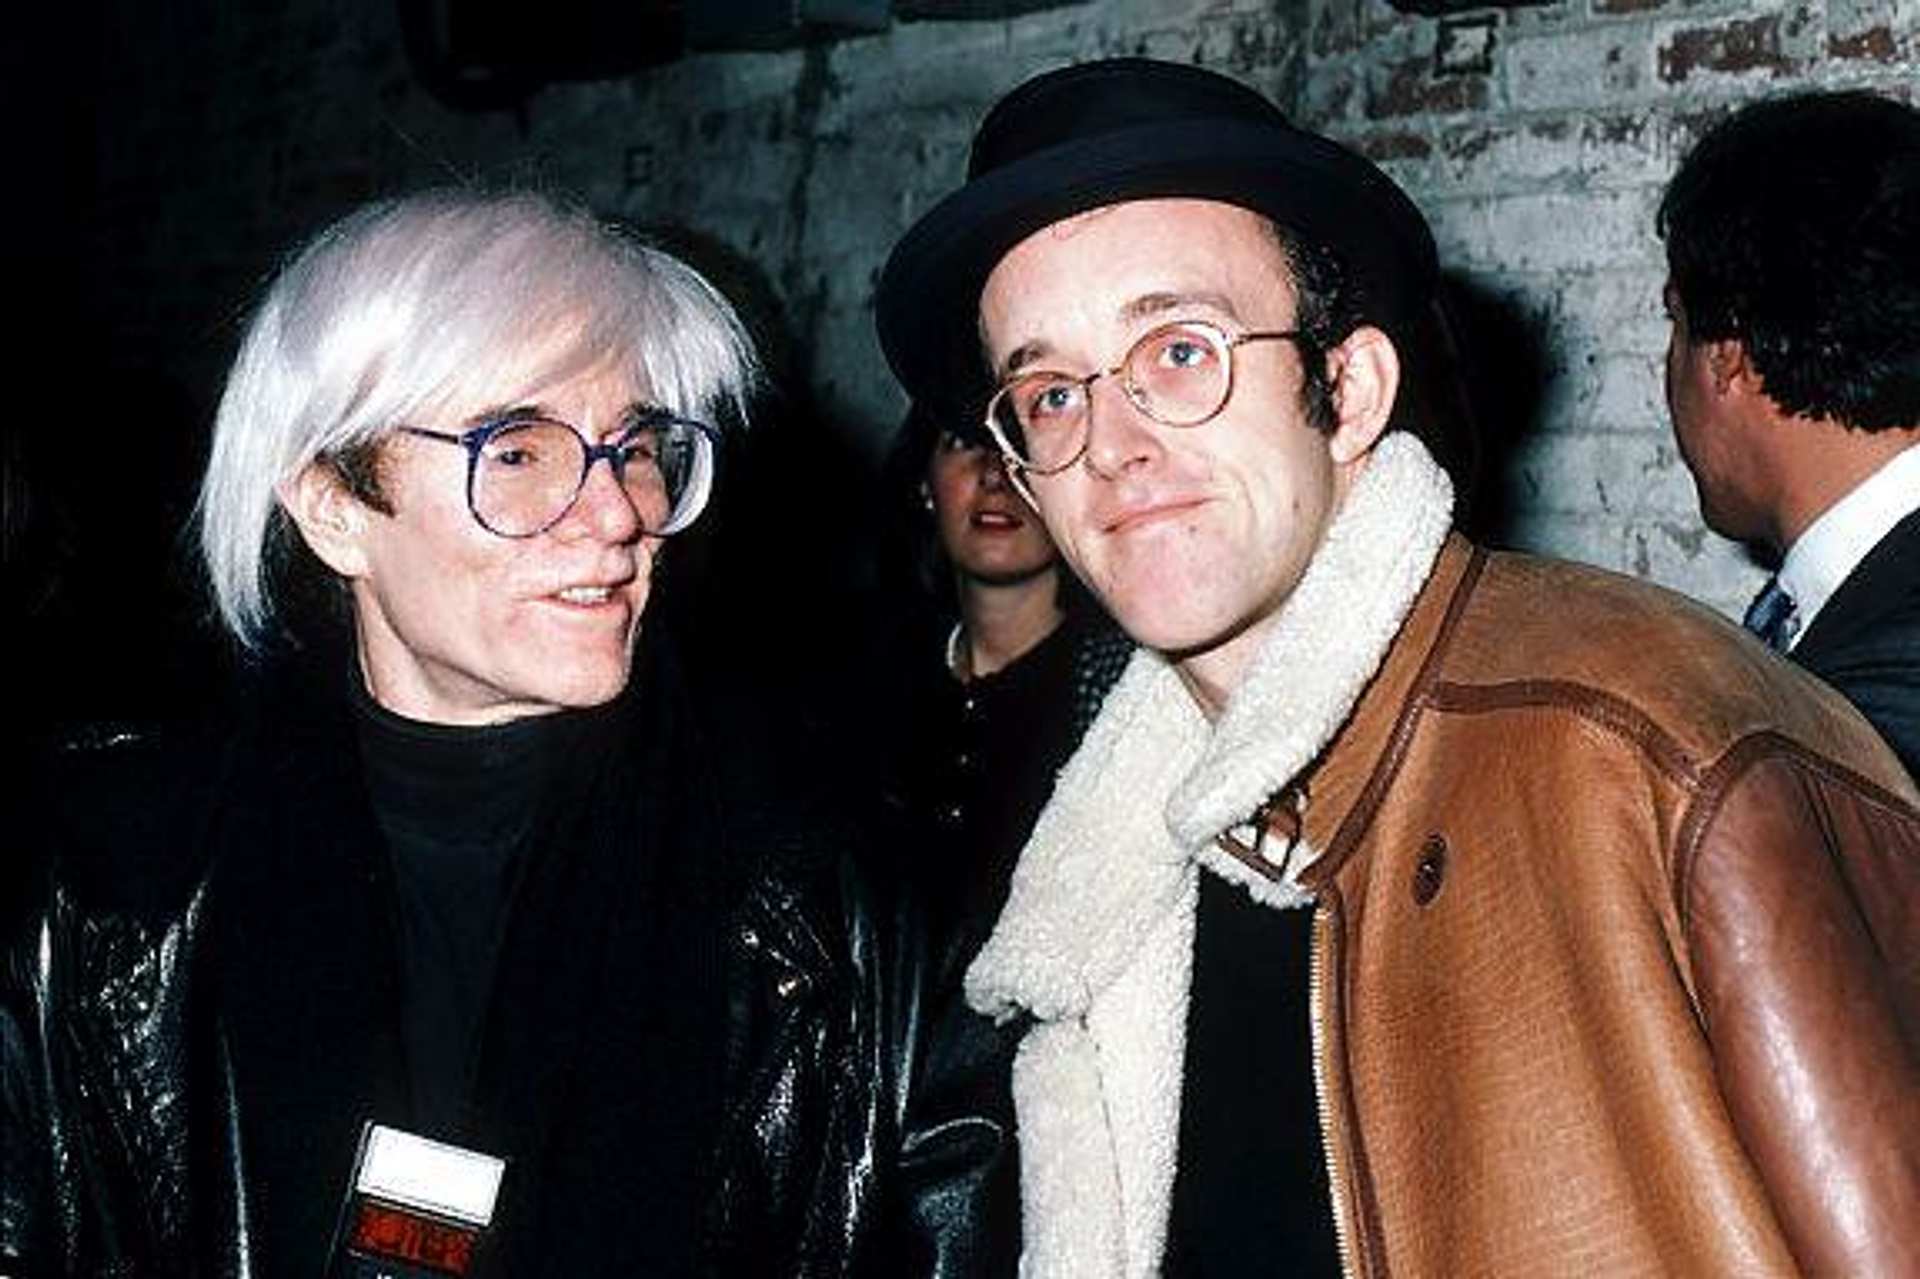 A photograph of the artists Andy Warhol and Keith Haring together. Haring smiles at the camera while Warhol talks to him.